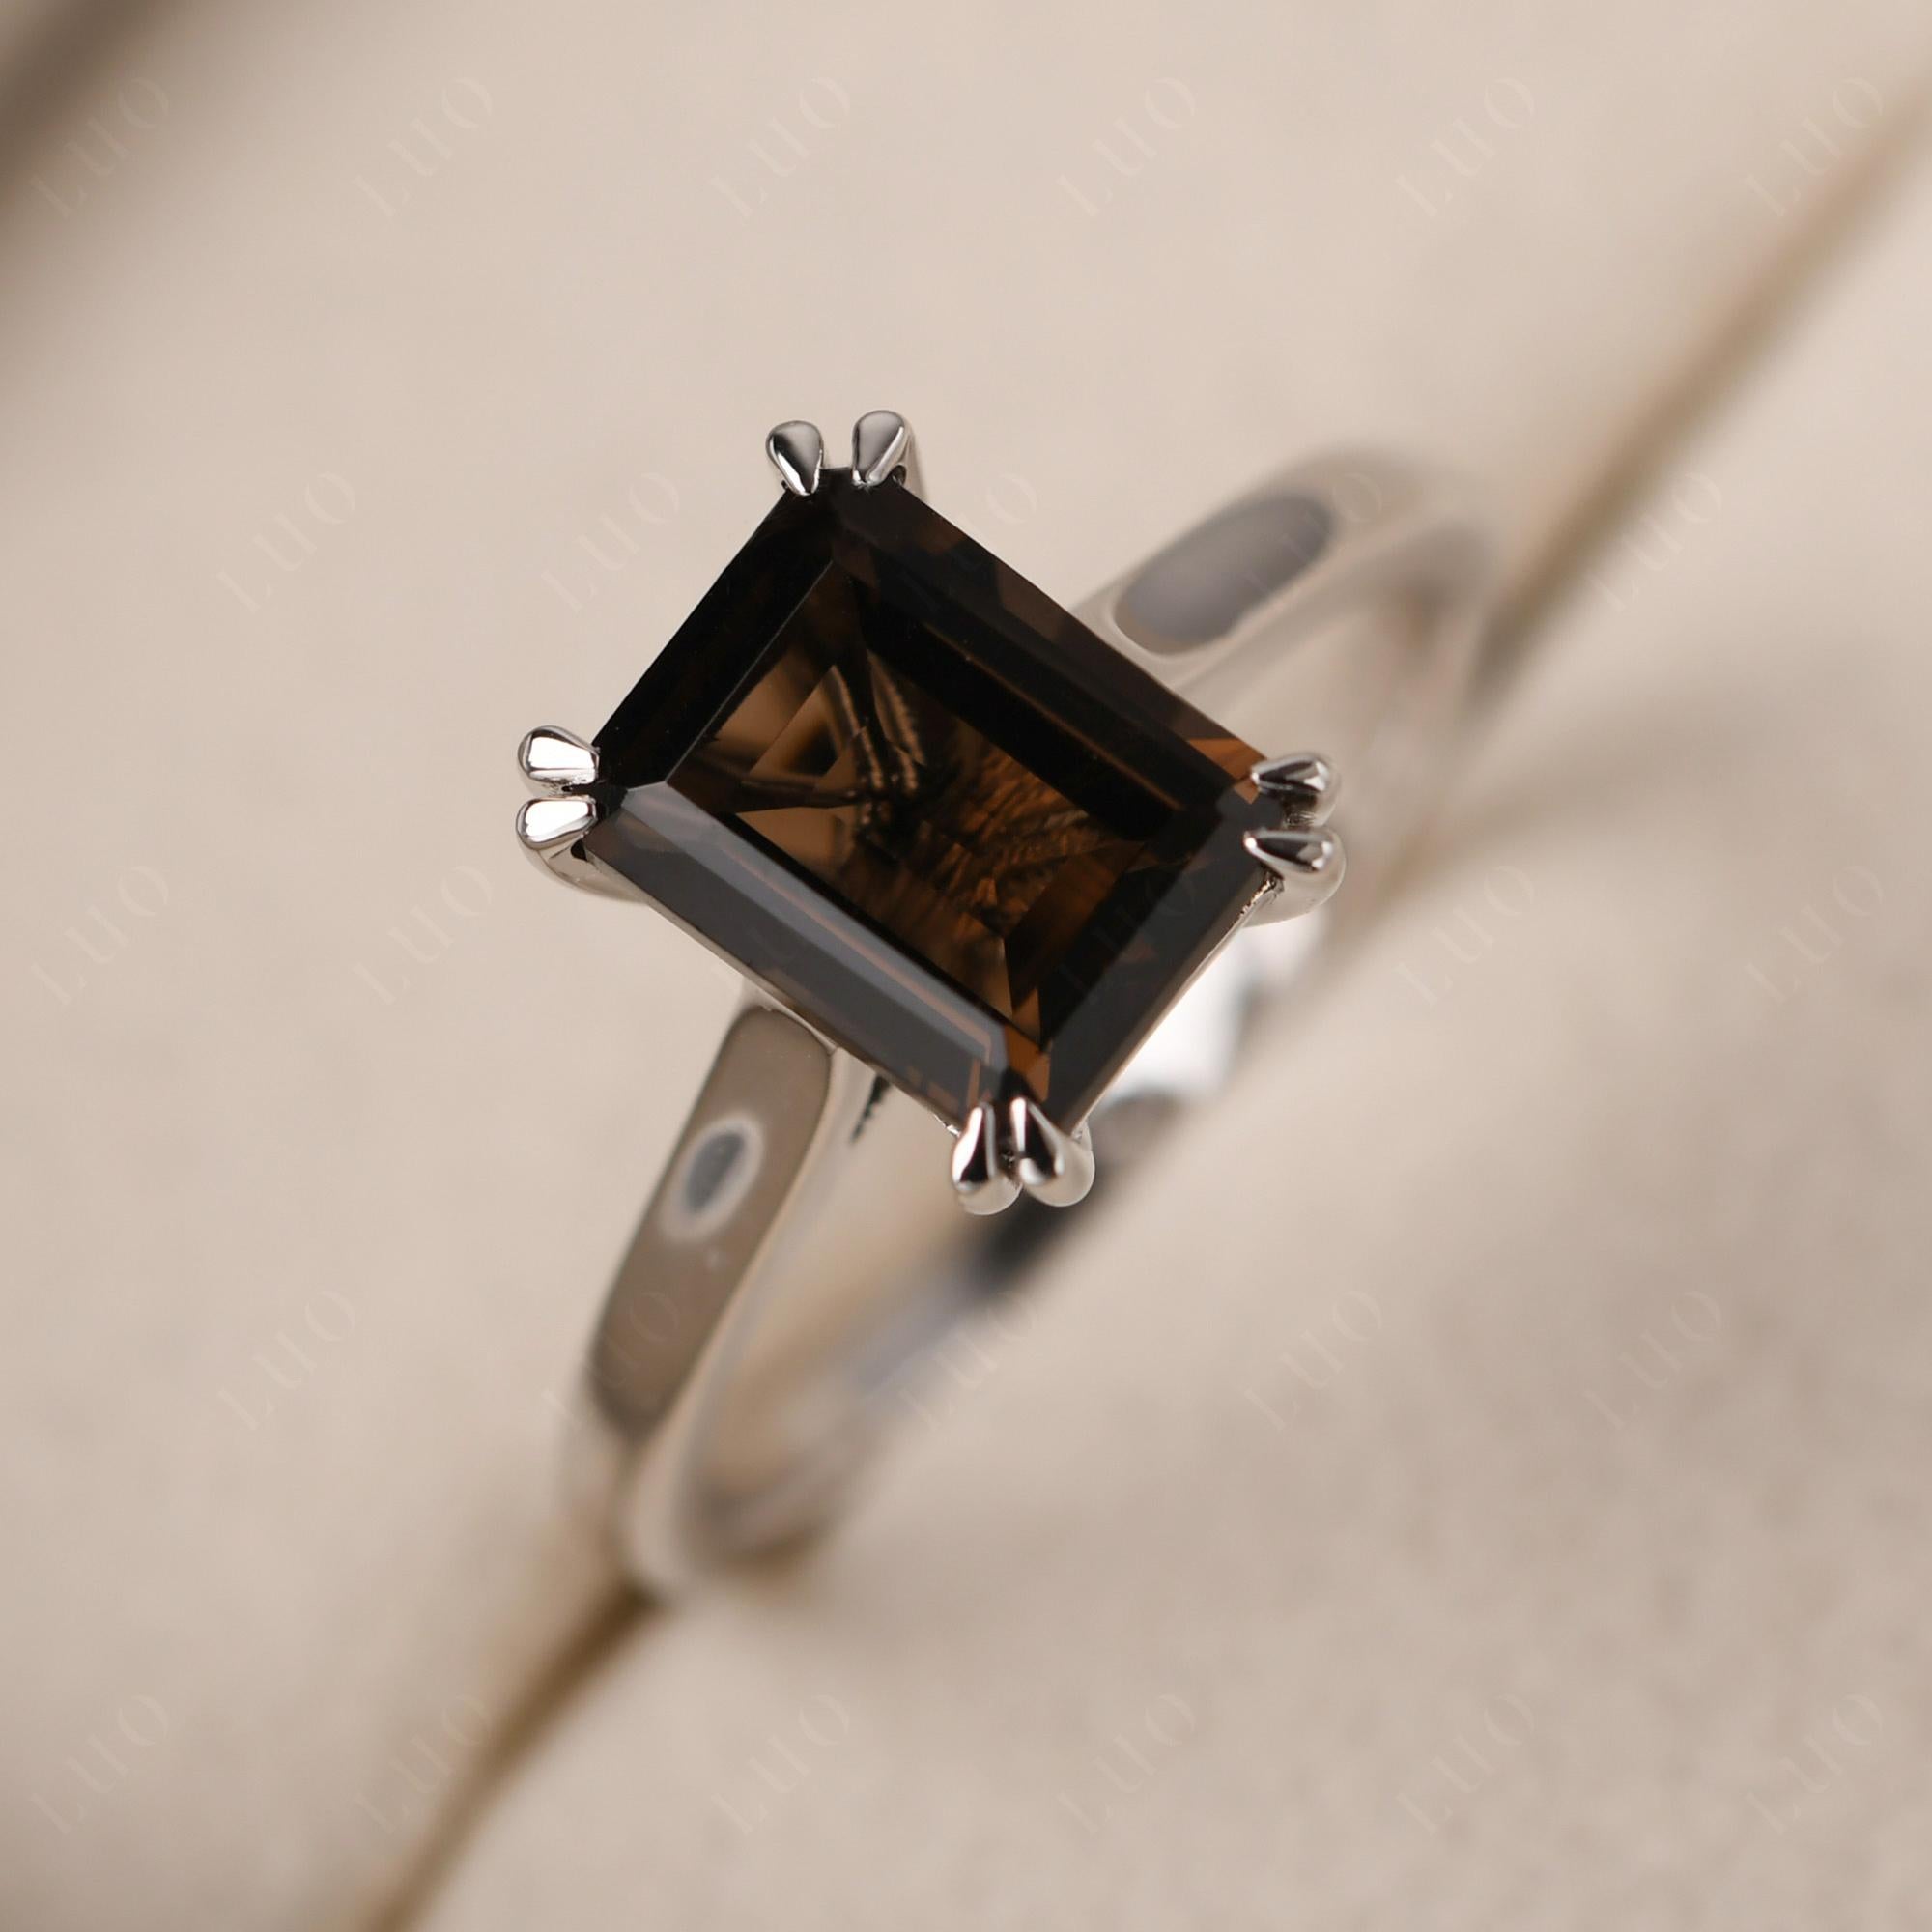 Emerald Cut Smoky Quartz Solitaire Wedding Ring - LUO Jewelry